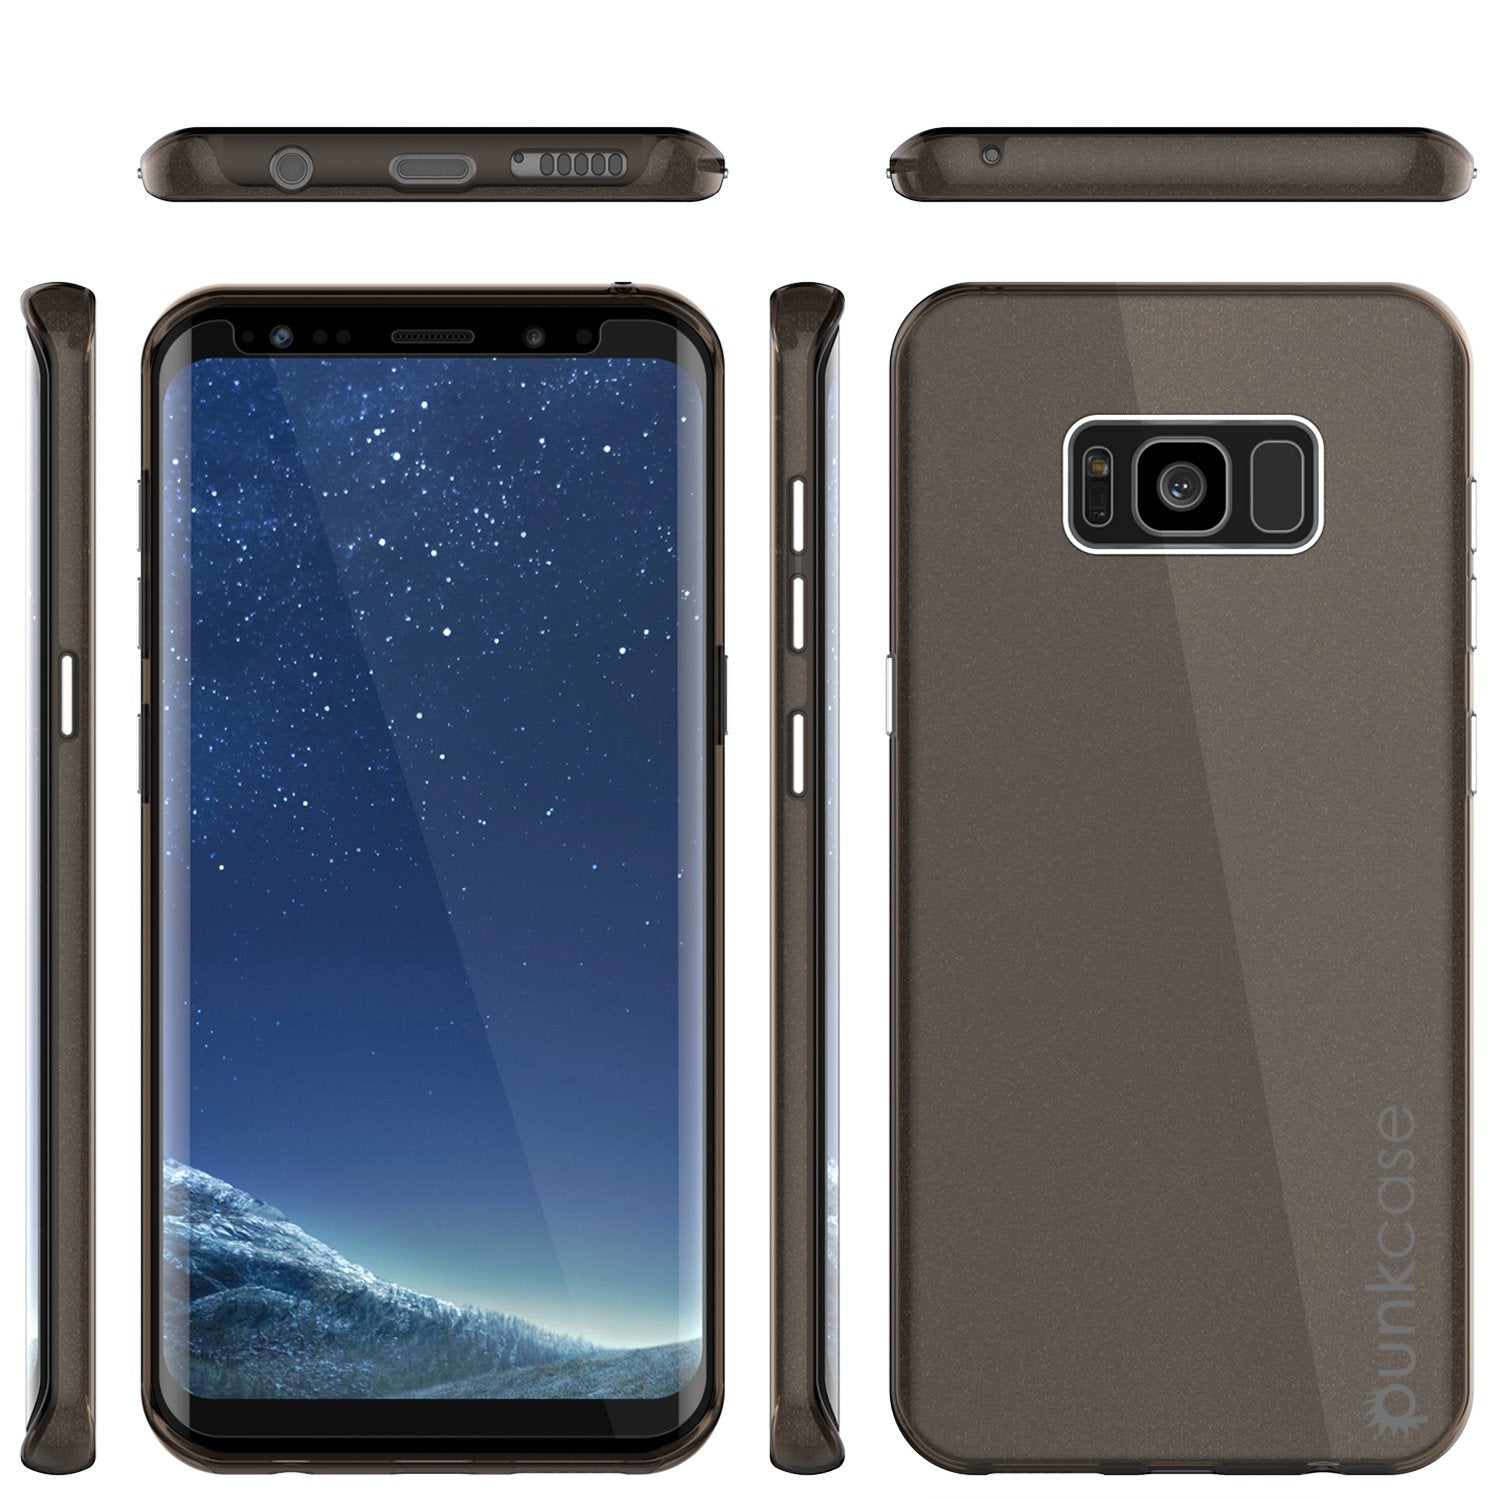 Galaxy S8 Plus Case, Punkcase Galactic 2.0 Series Ultra Slim Protective Armor TPU Cover [Black]